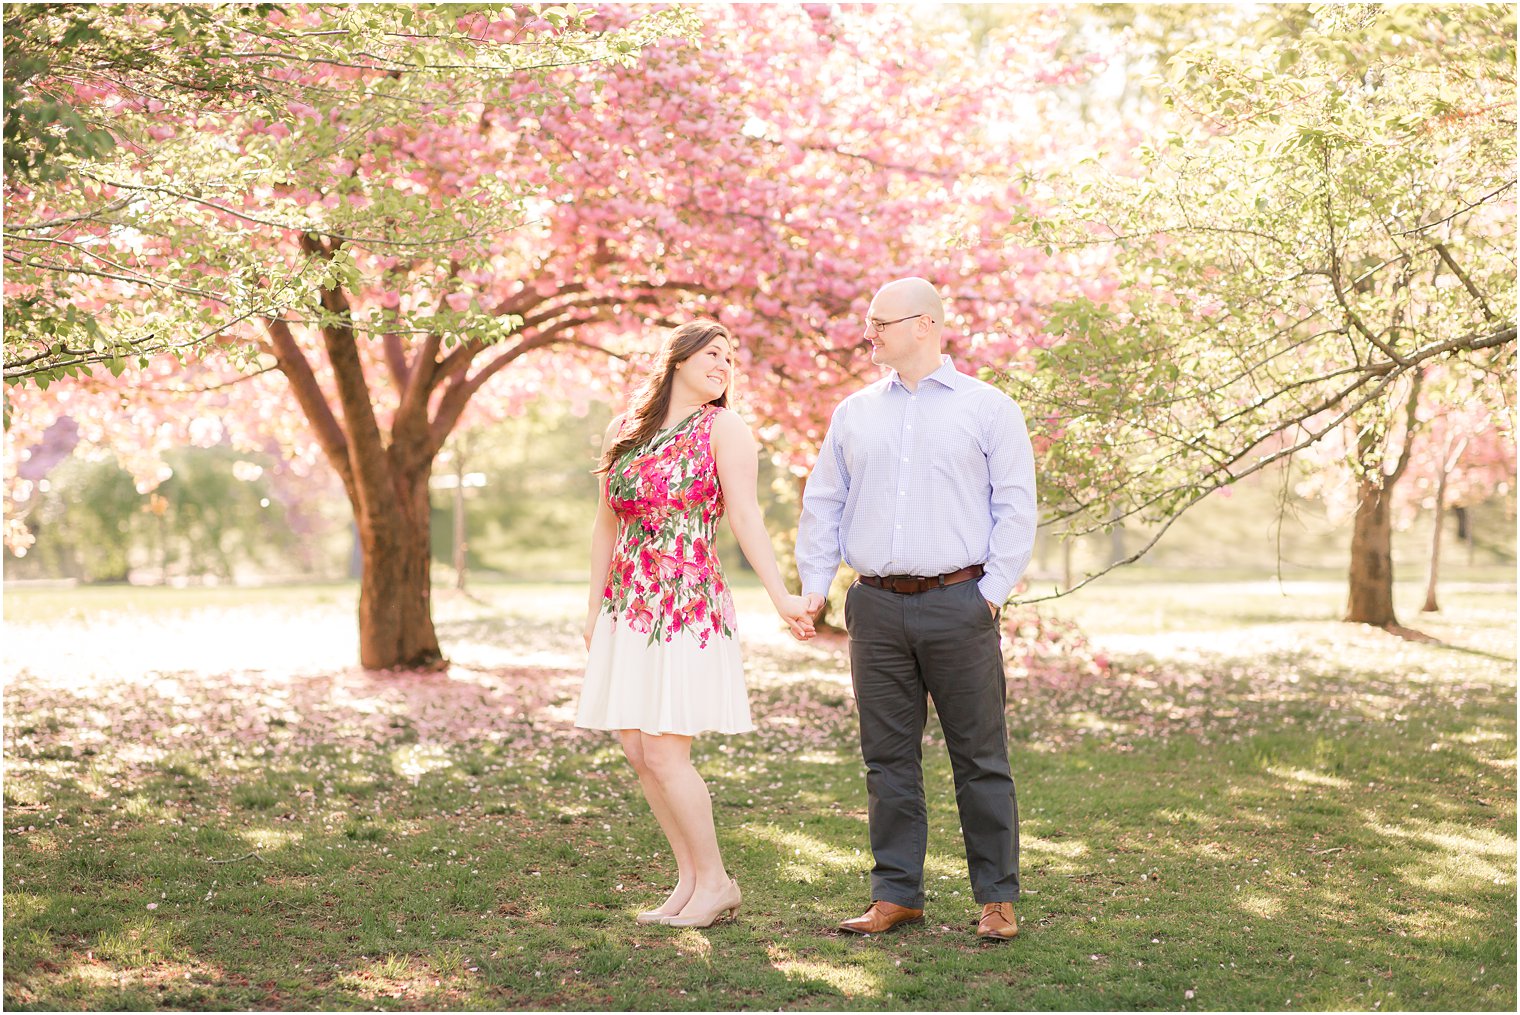 Engagement photos at Branch Brook Park during Cherry Blossom Festival